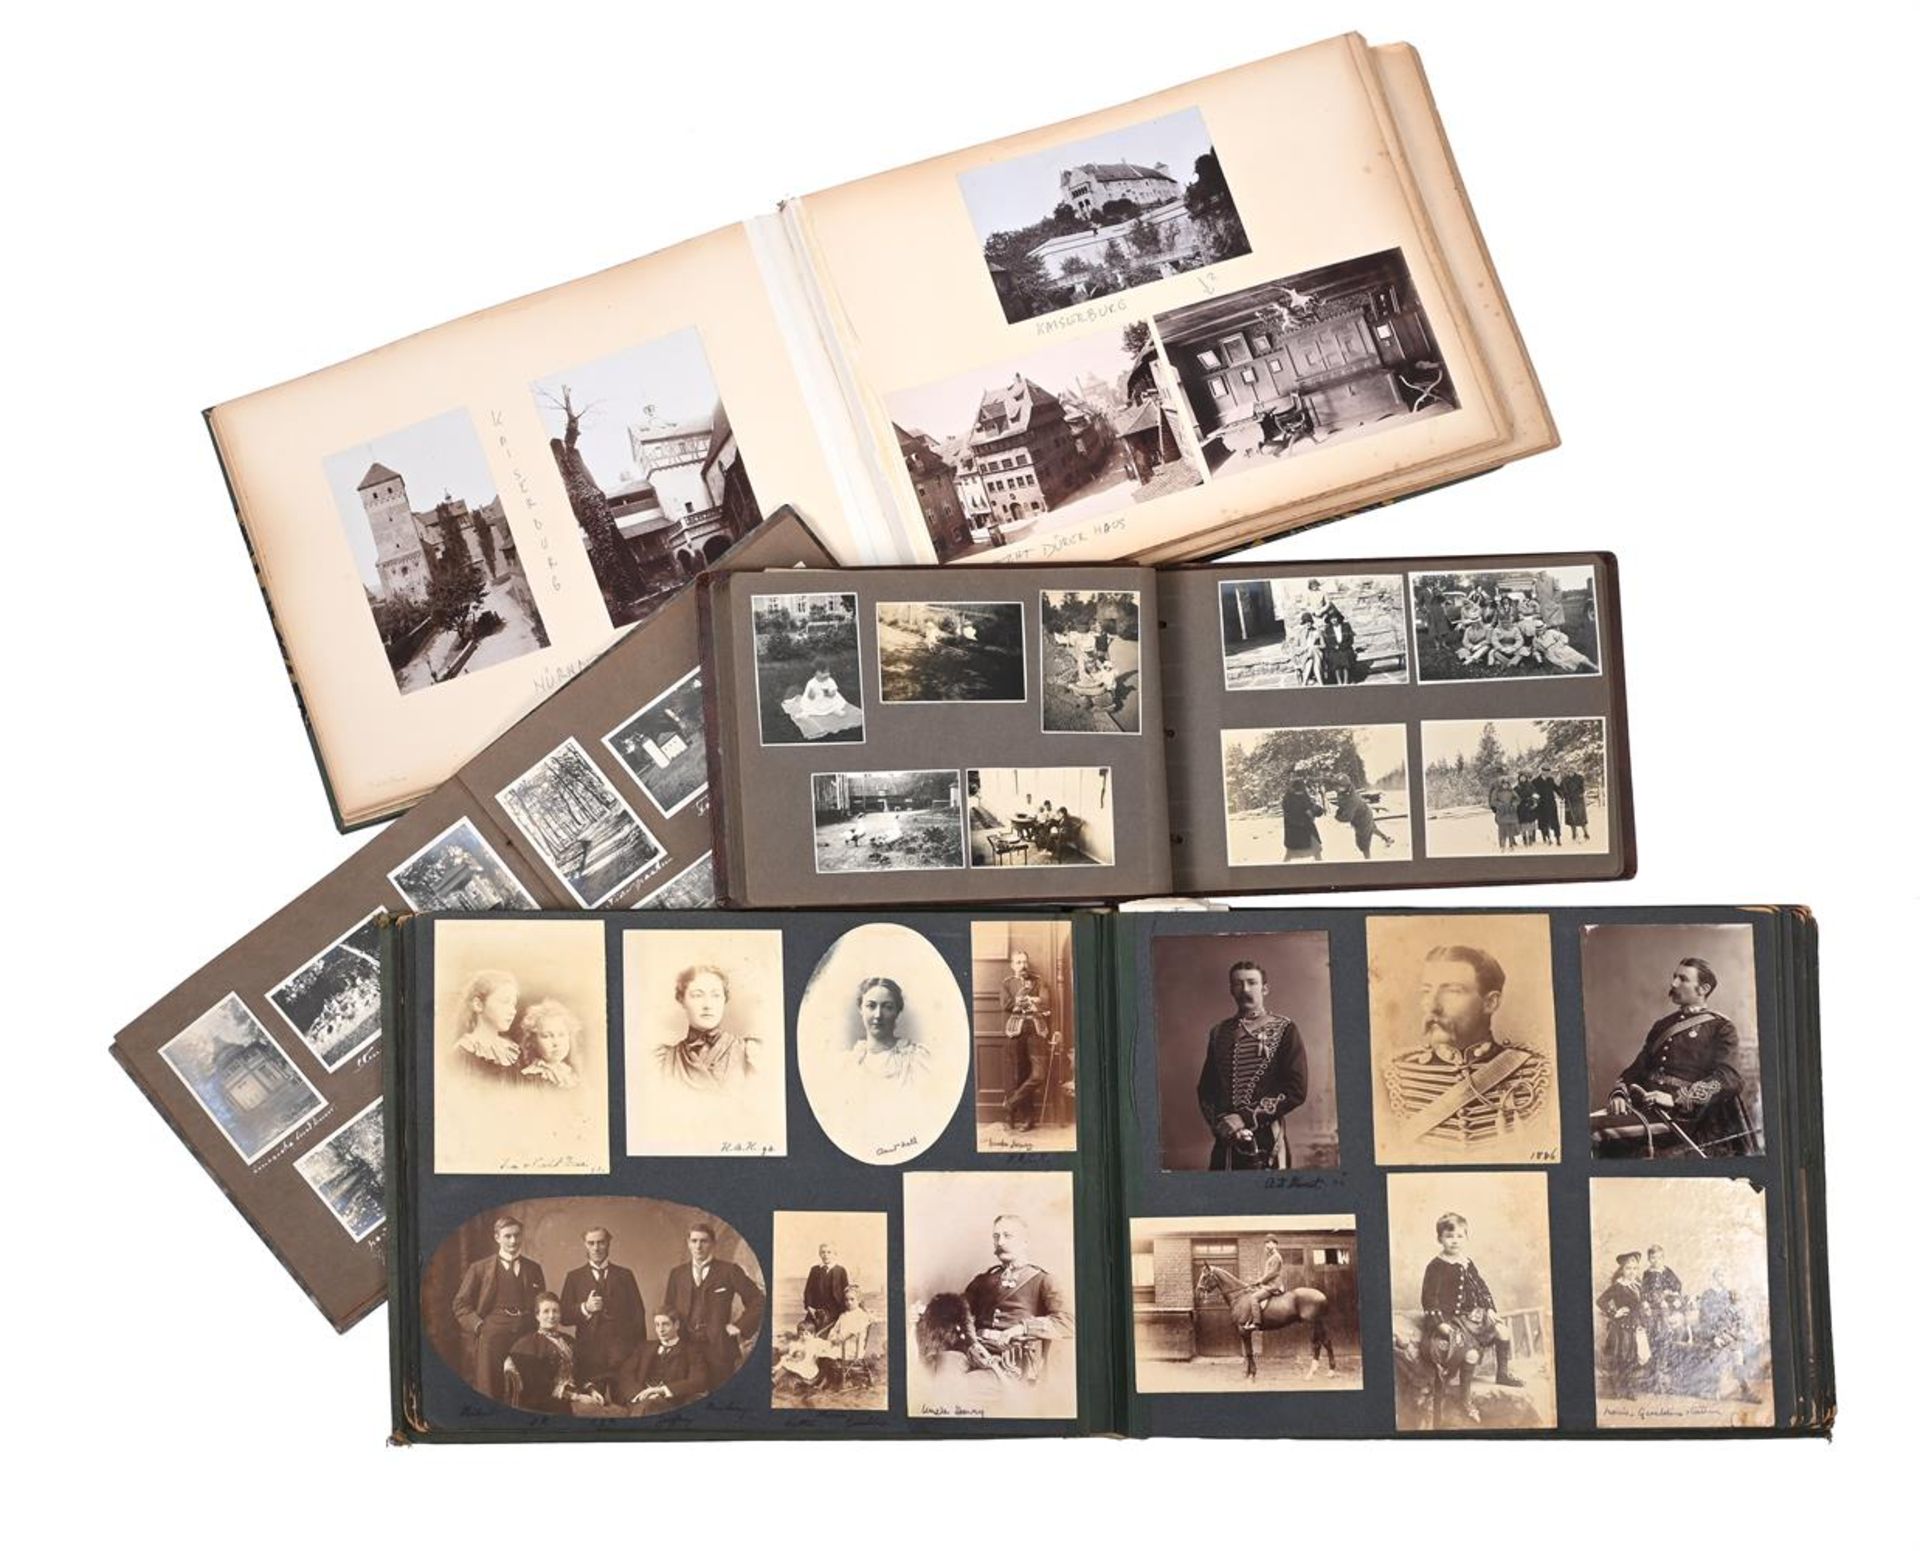 A LARGE QUANTITY OF PHOTO ALBUMS RELATING TO THE CLUYSENAAR FAMILY